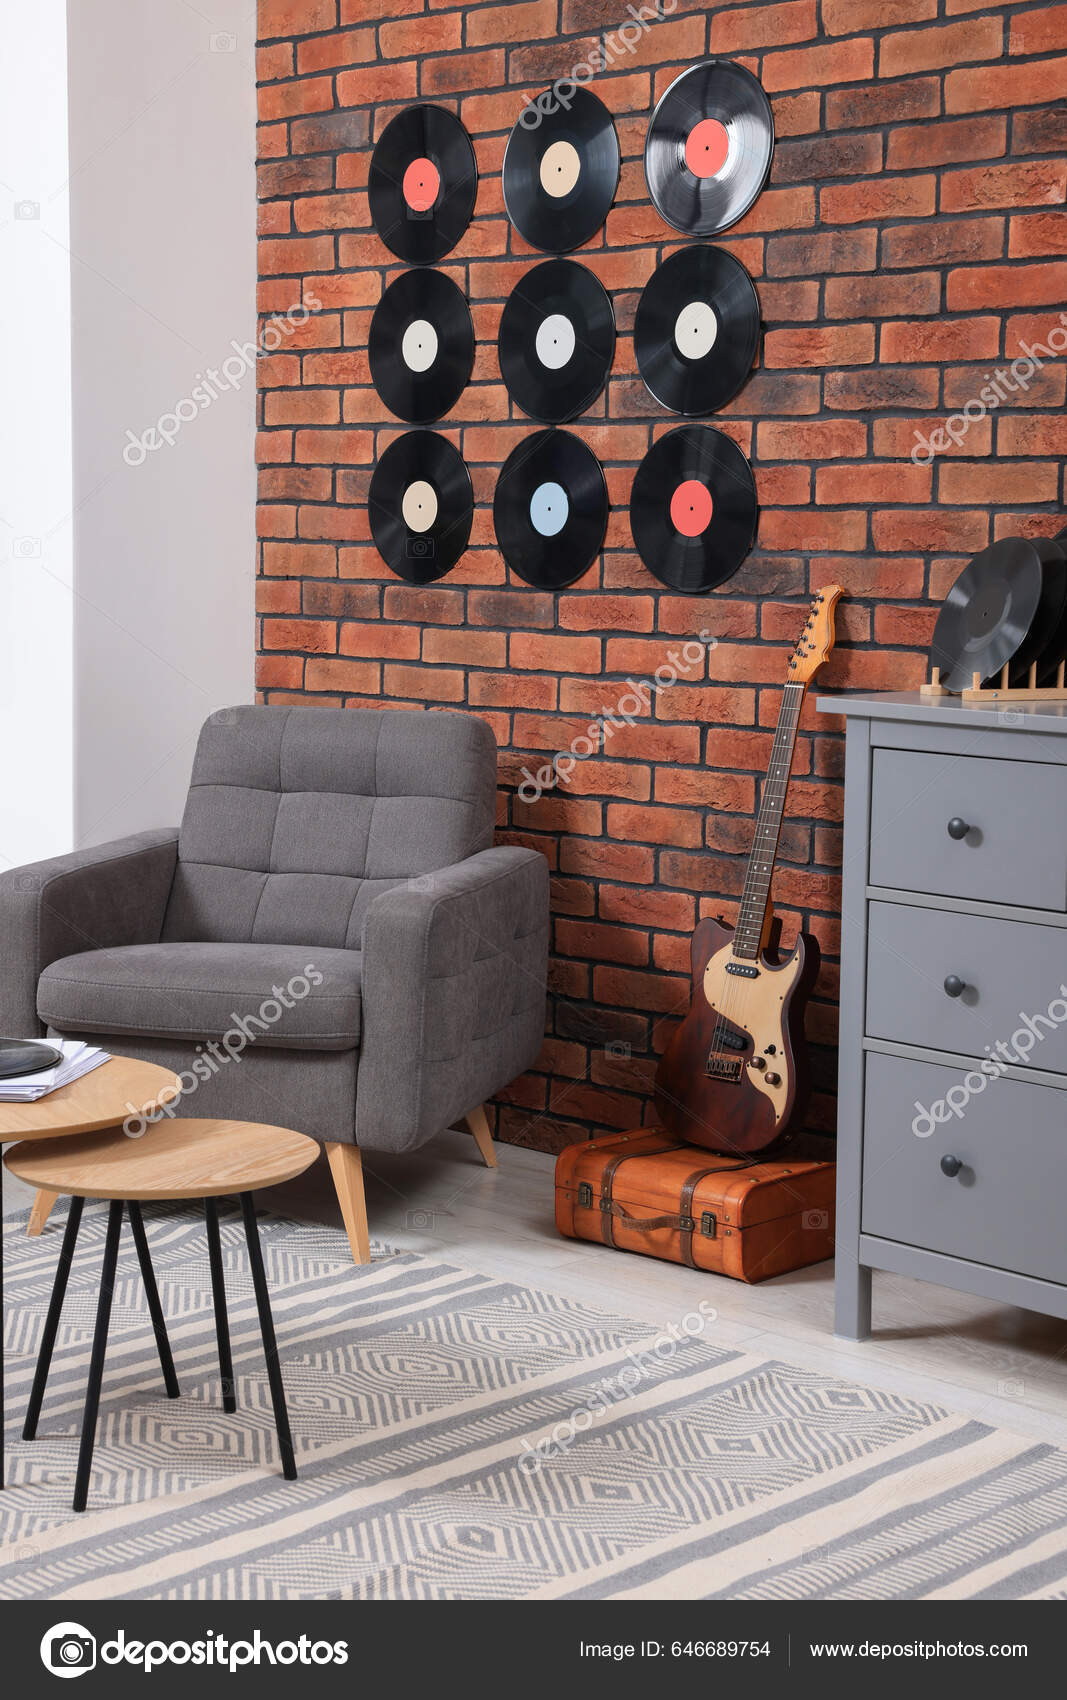 Living Room Interior Decorated Vinyl Records Stock Photo by